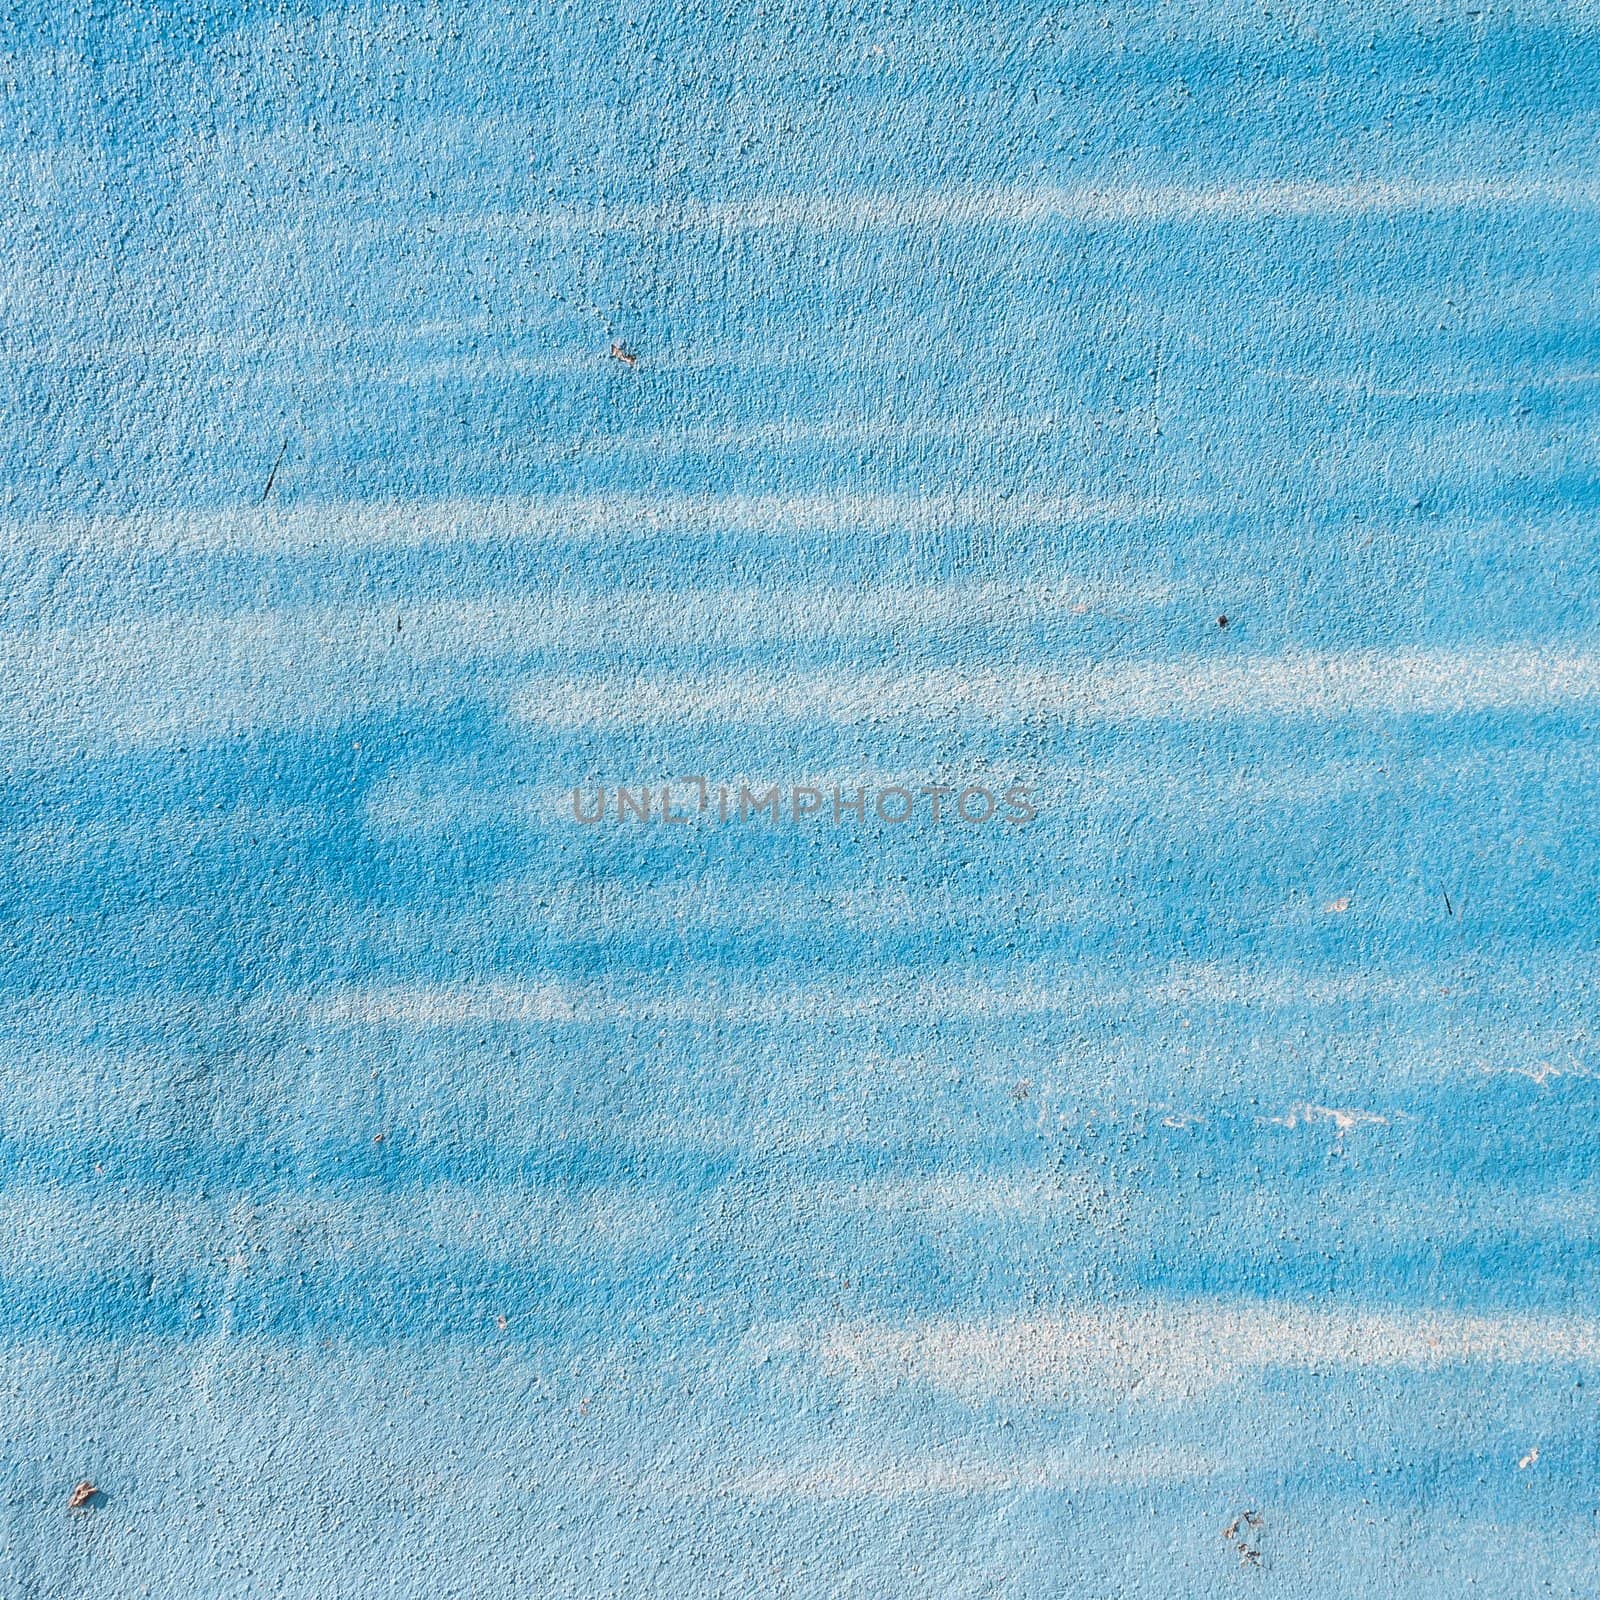 blue painted material wall texture artistic pattern